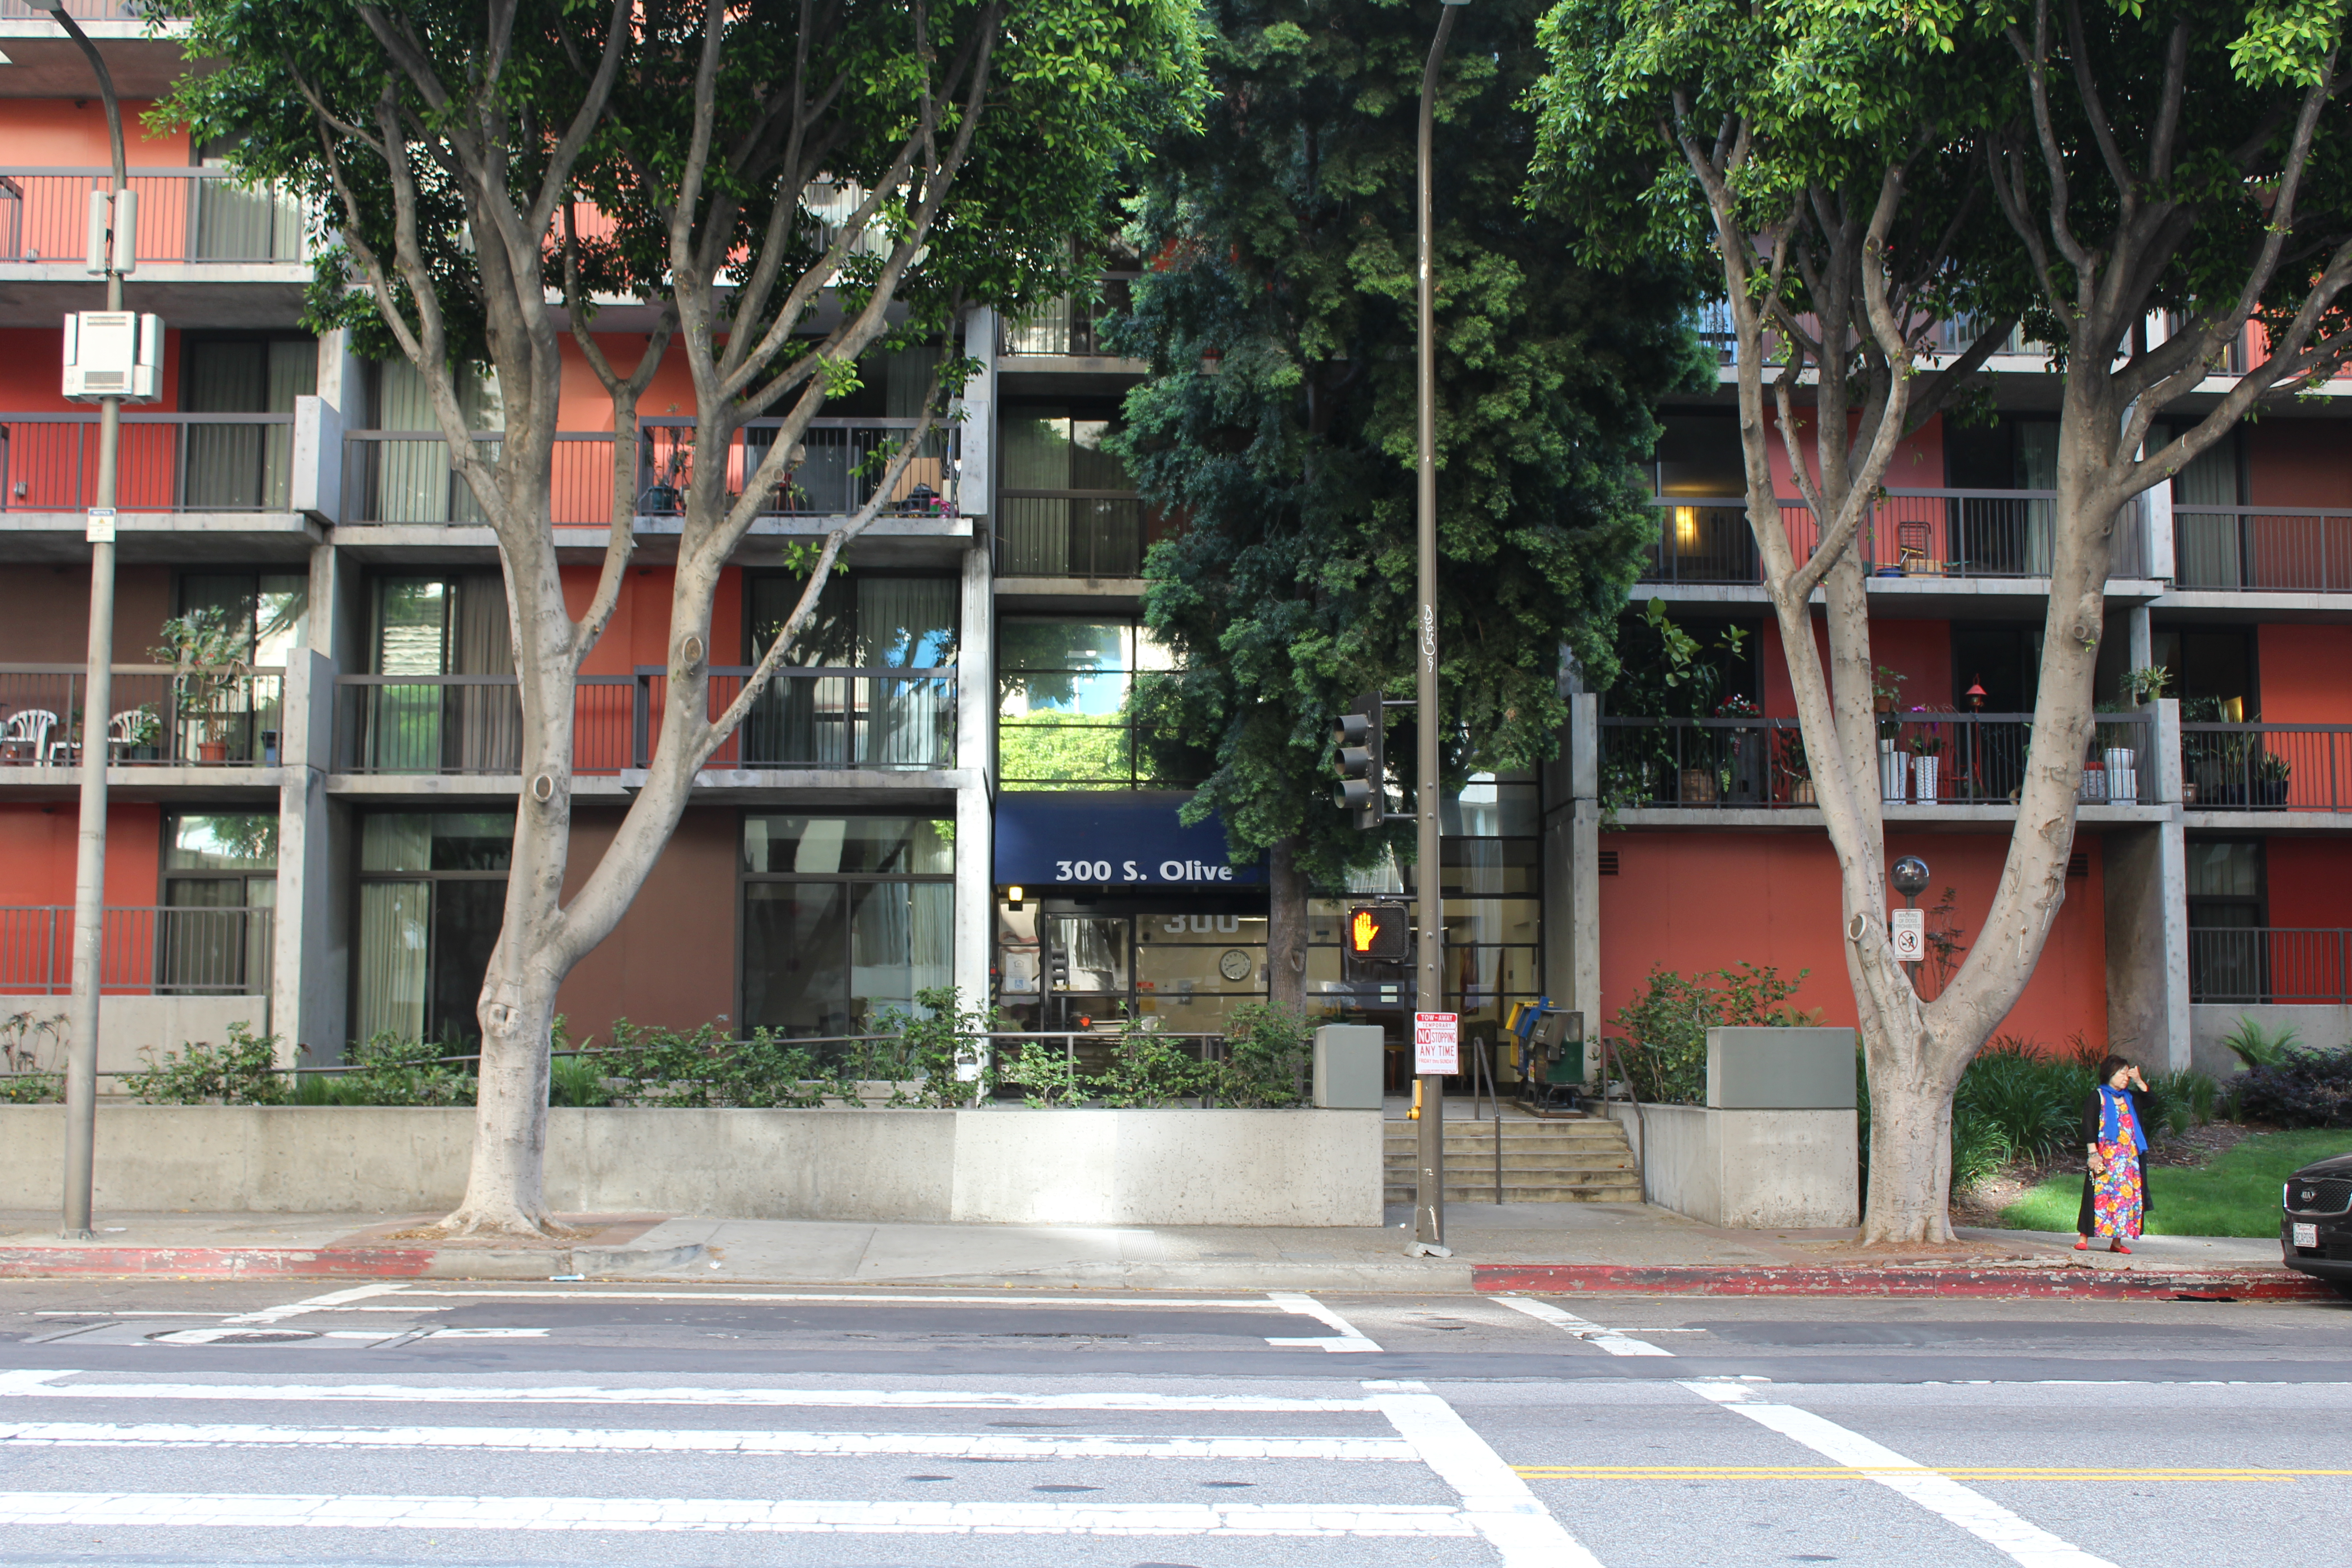 Street view of Angelus Plaza 1. Multilevel orange building with large trees and street lamps on sidewalk in front of builing.